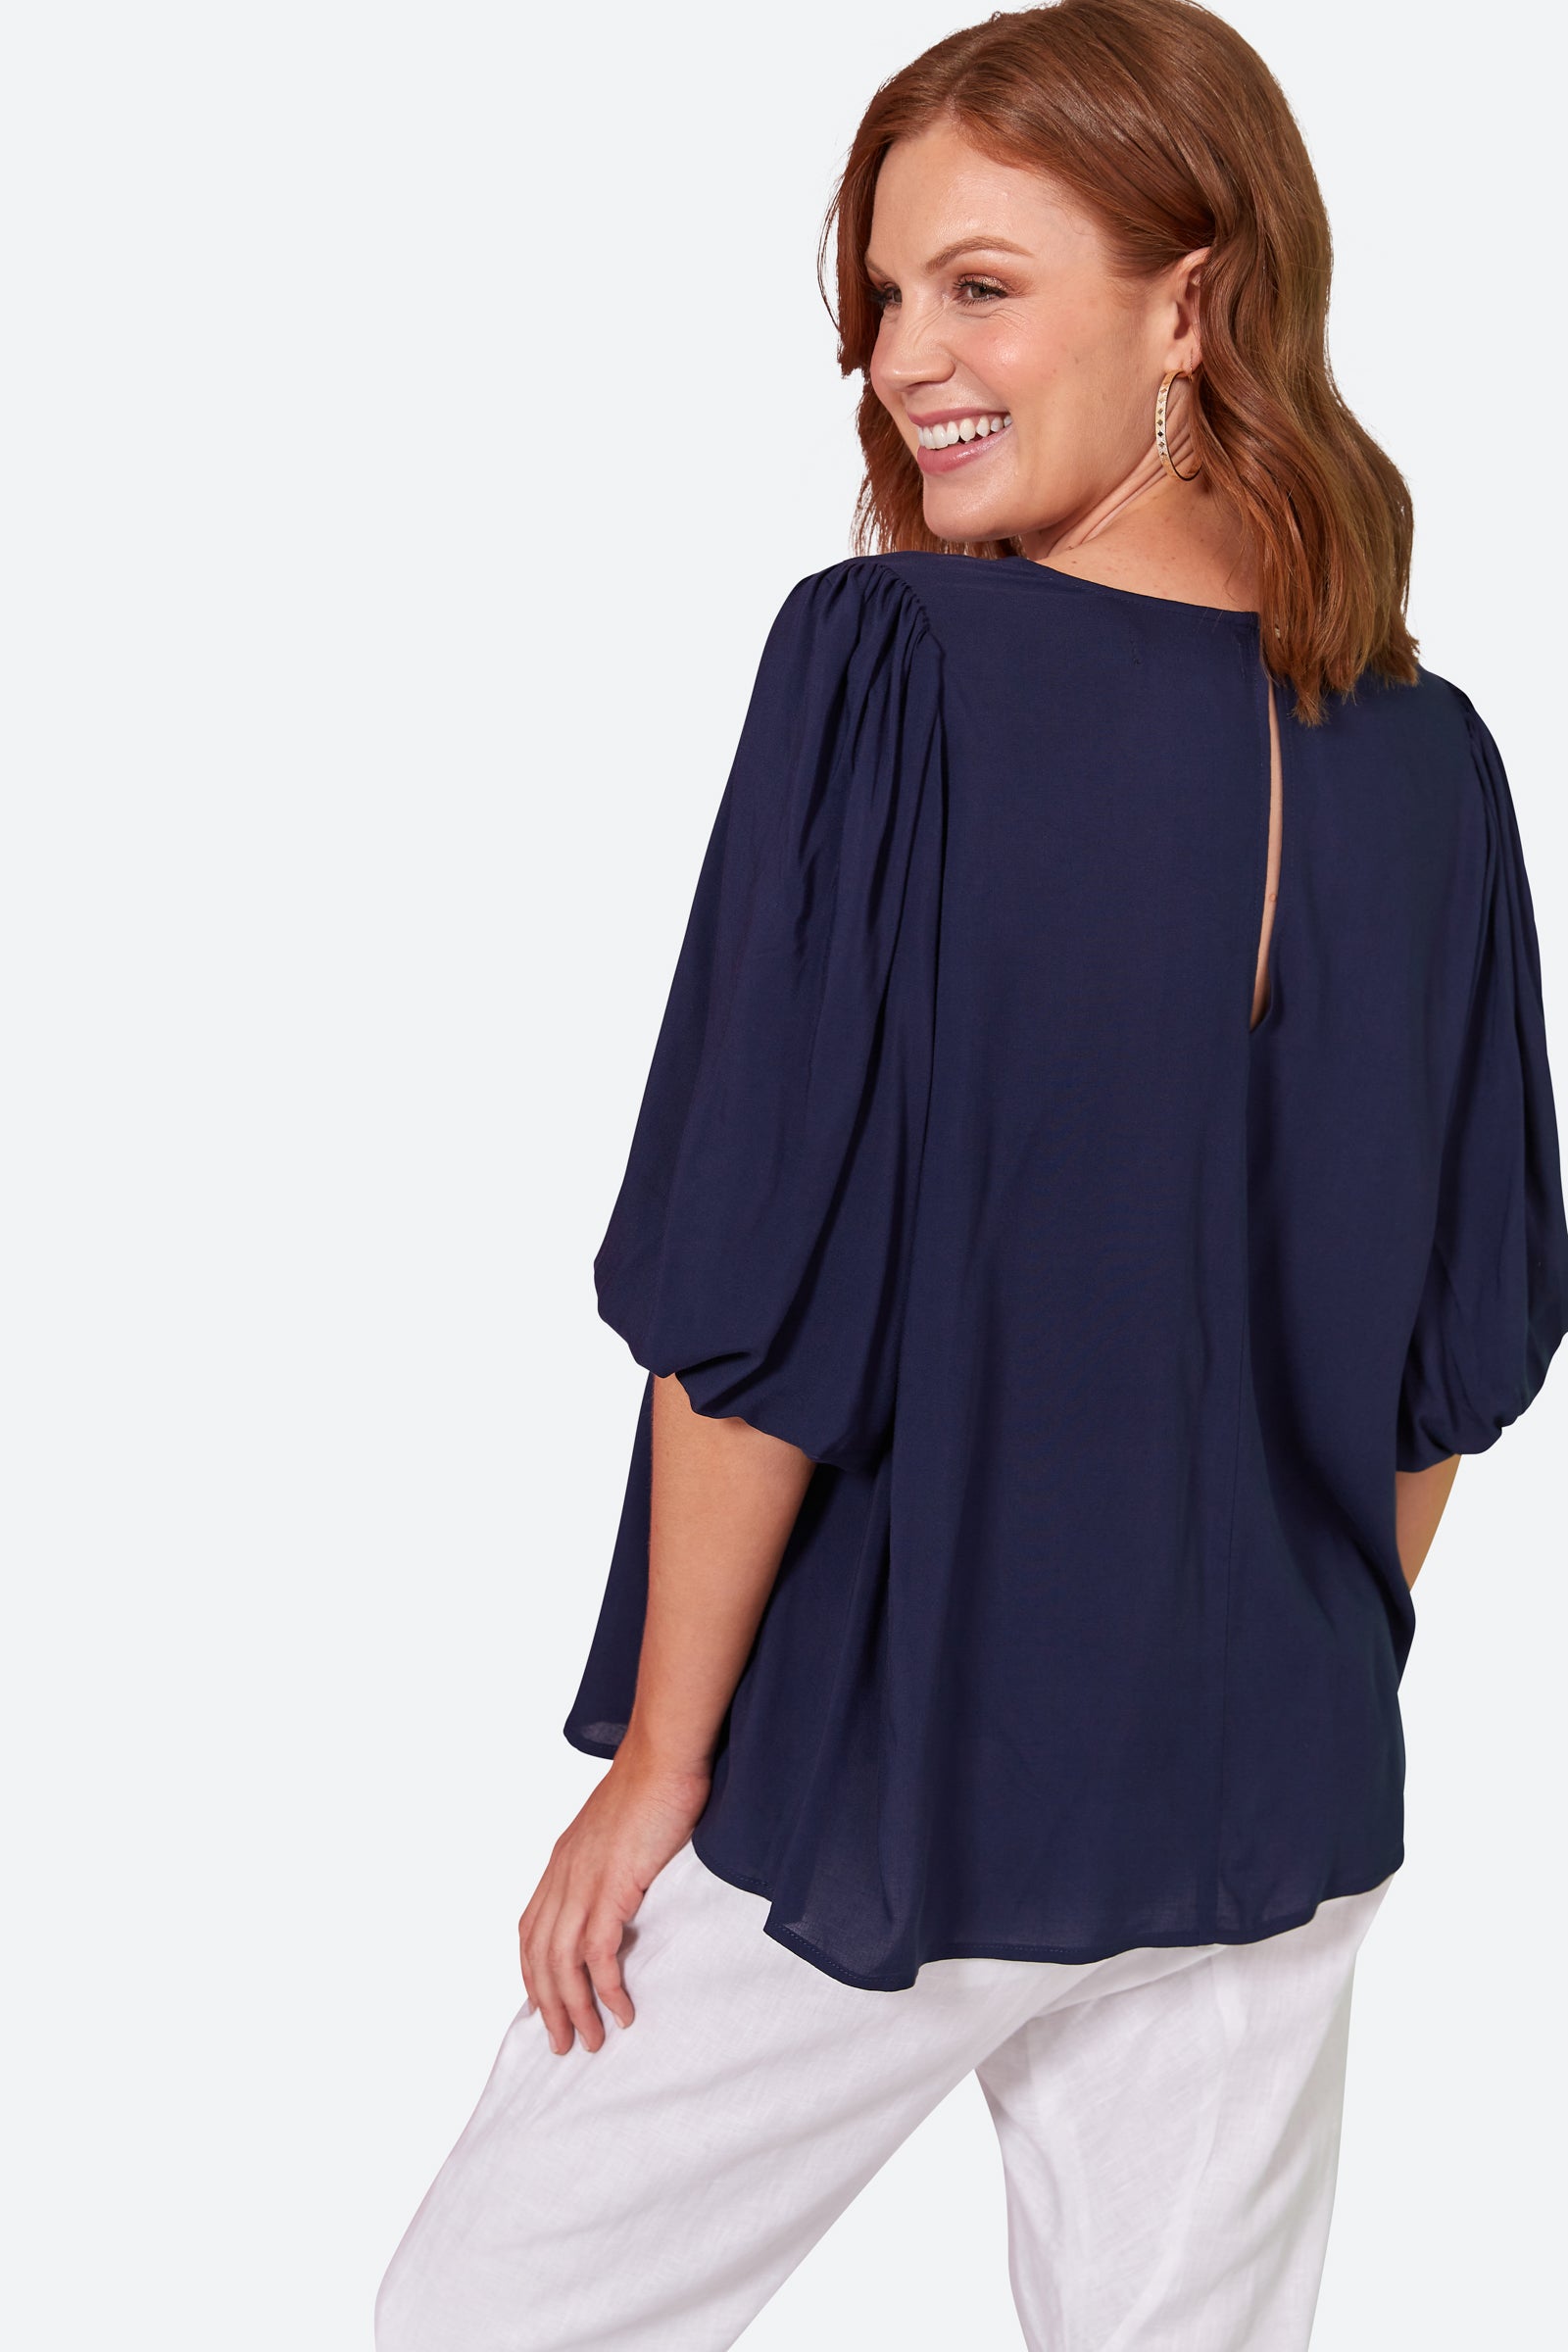 Esprit Top - Sapphire - eb&ive Clothing - Top 3/4 Sleeve